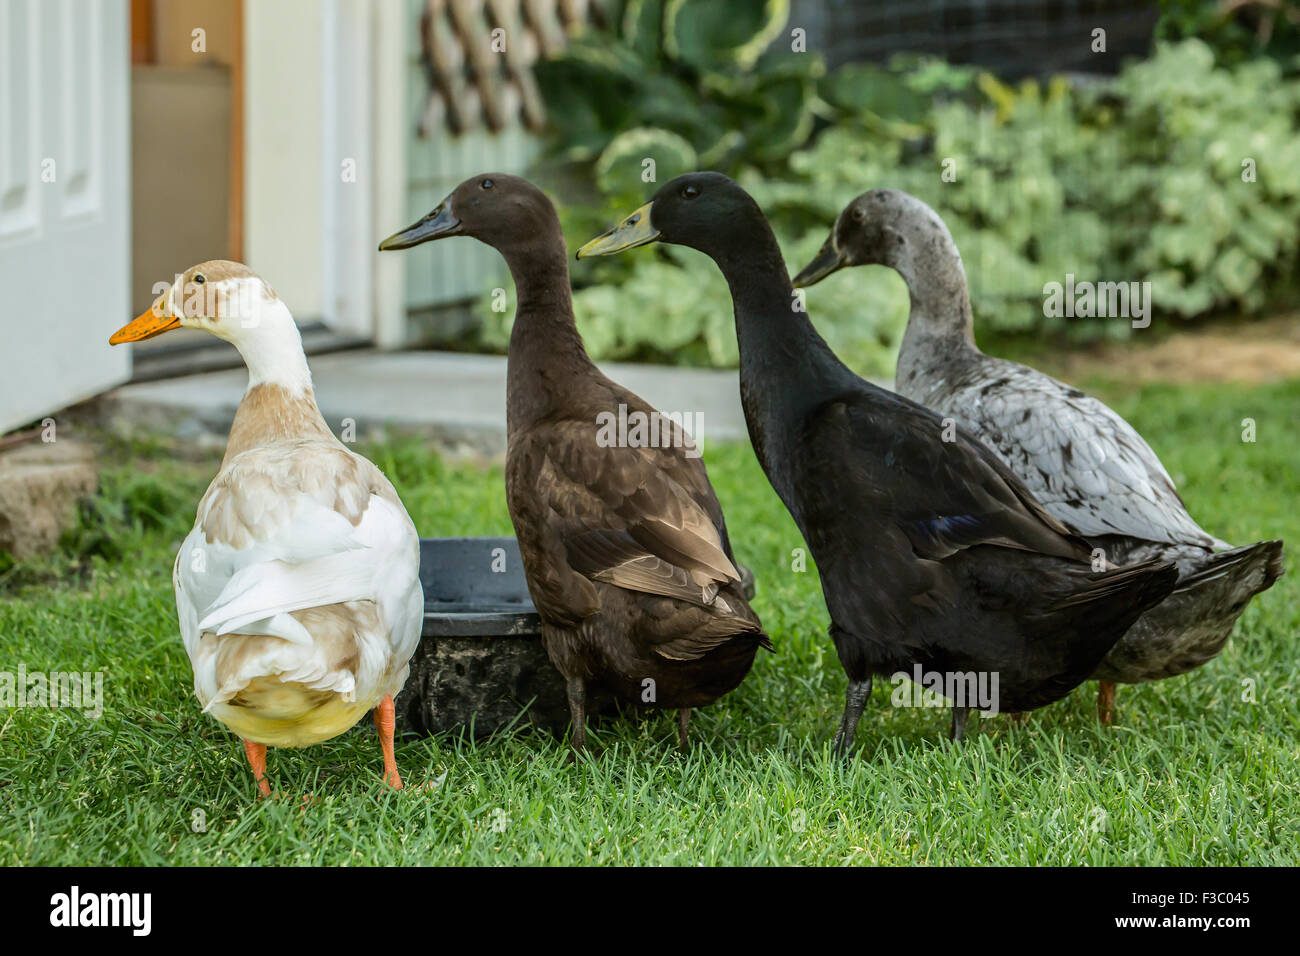 Four types of Indian Runner ducks (Anas platyrhynchos domesticus): White and Fawn, black, chocolate and blue. Stock Photo